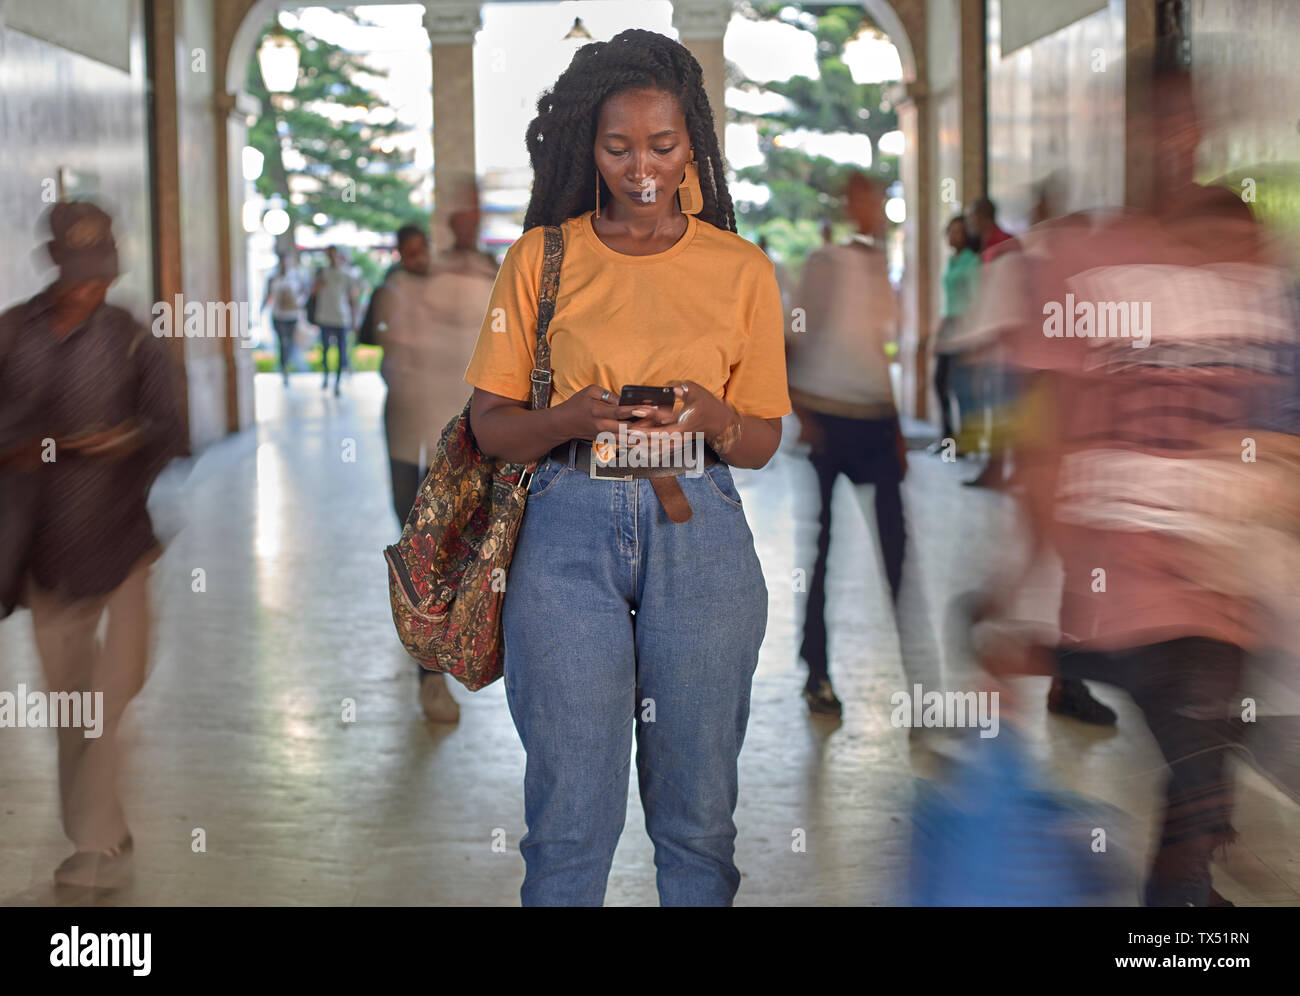 Young woman at the train station checking her phone while people passing by Stock Photo